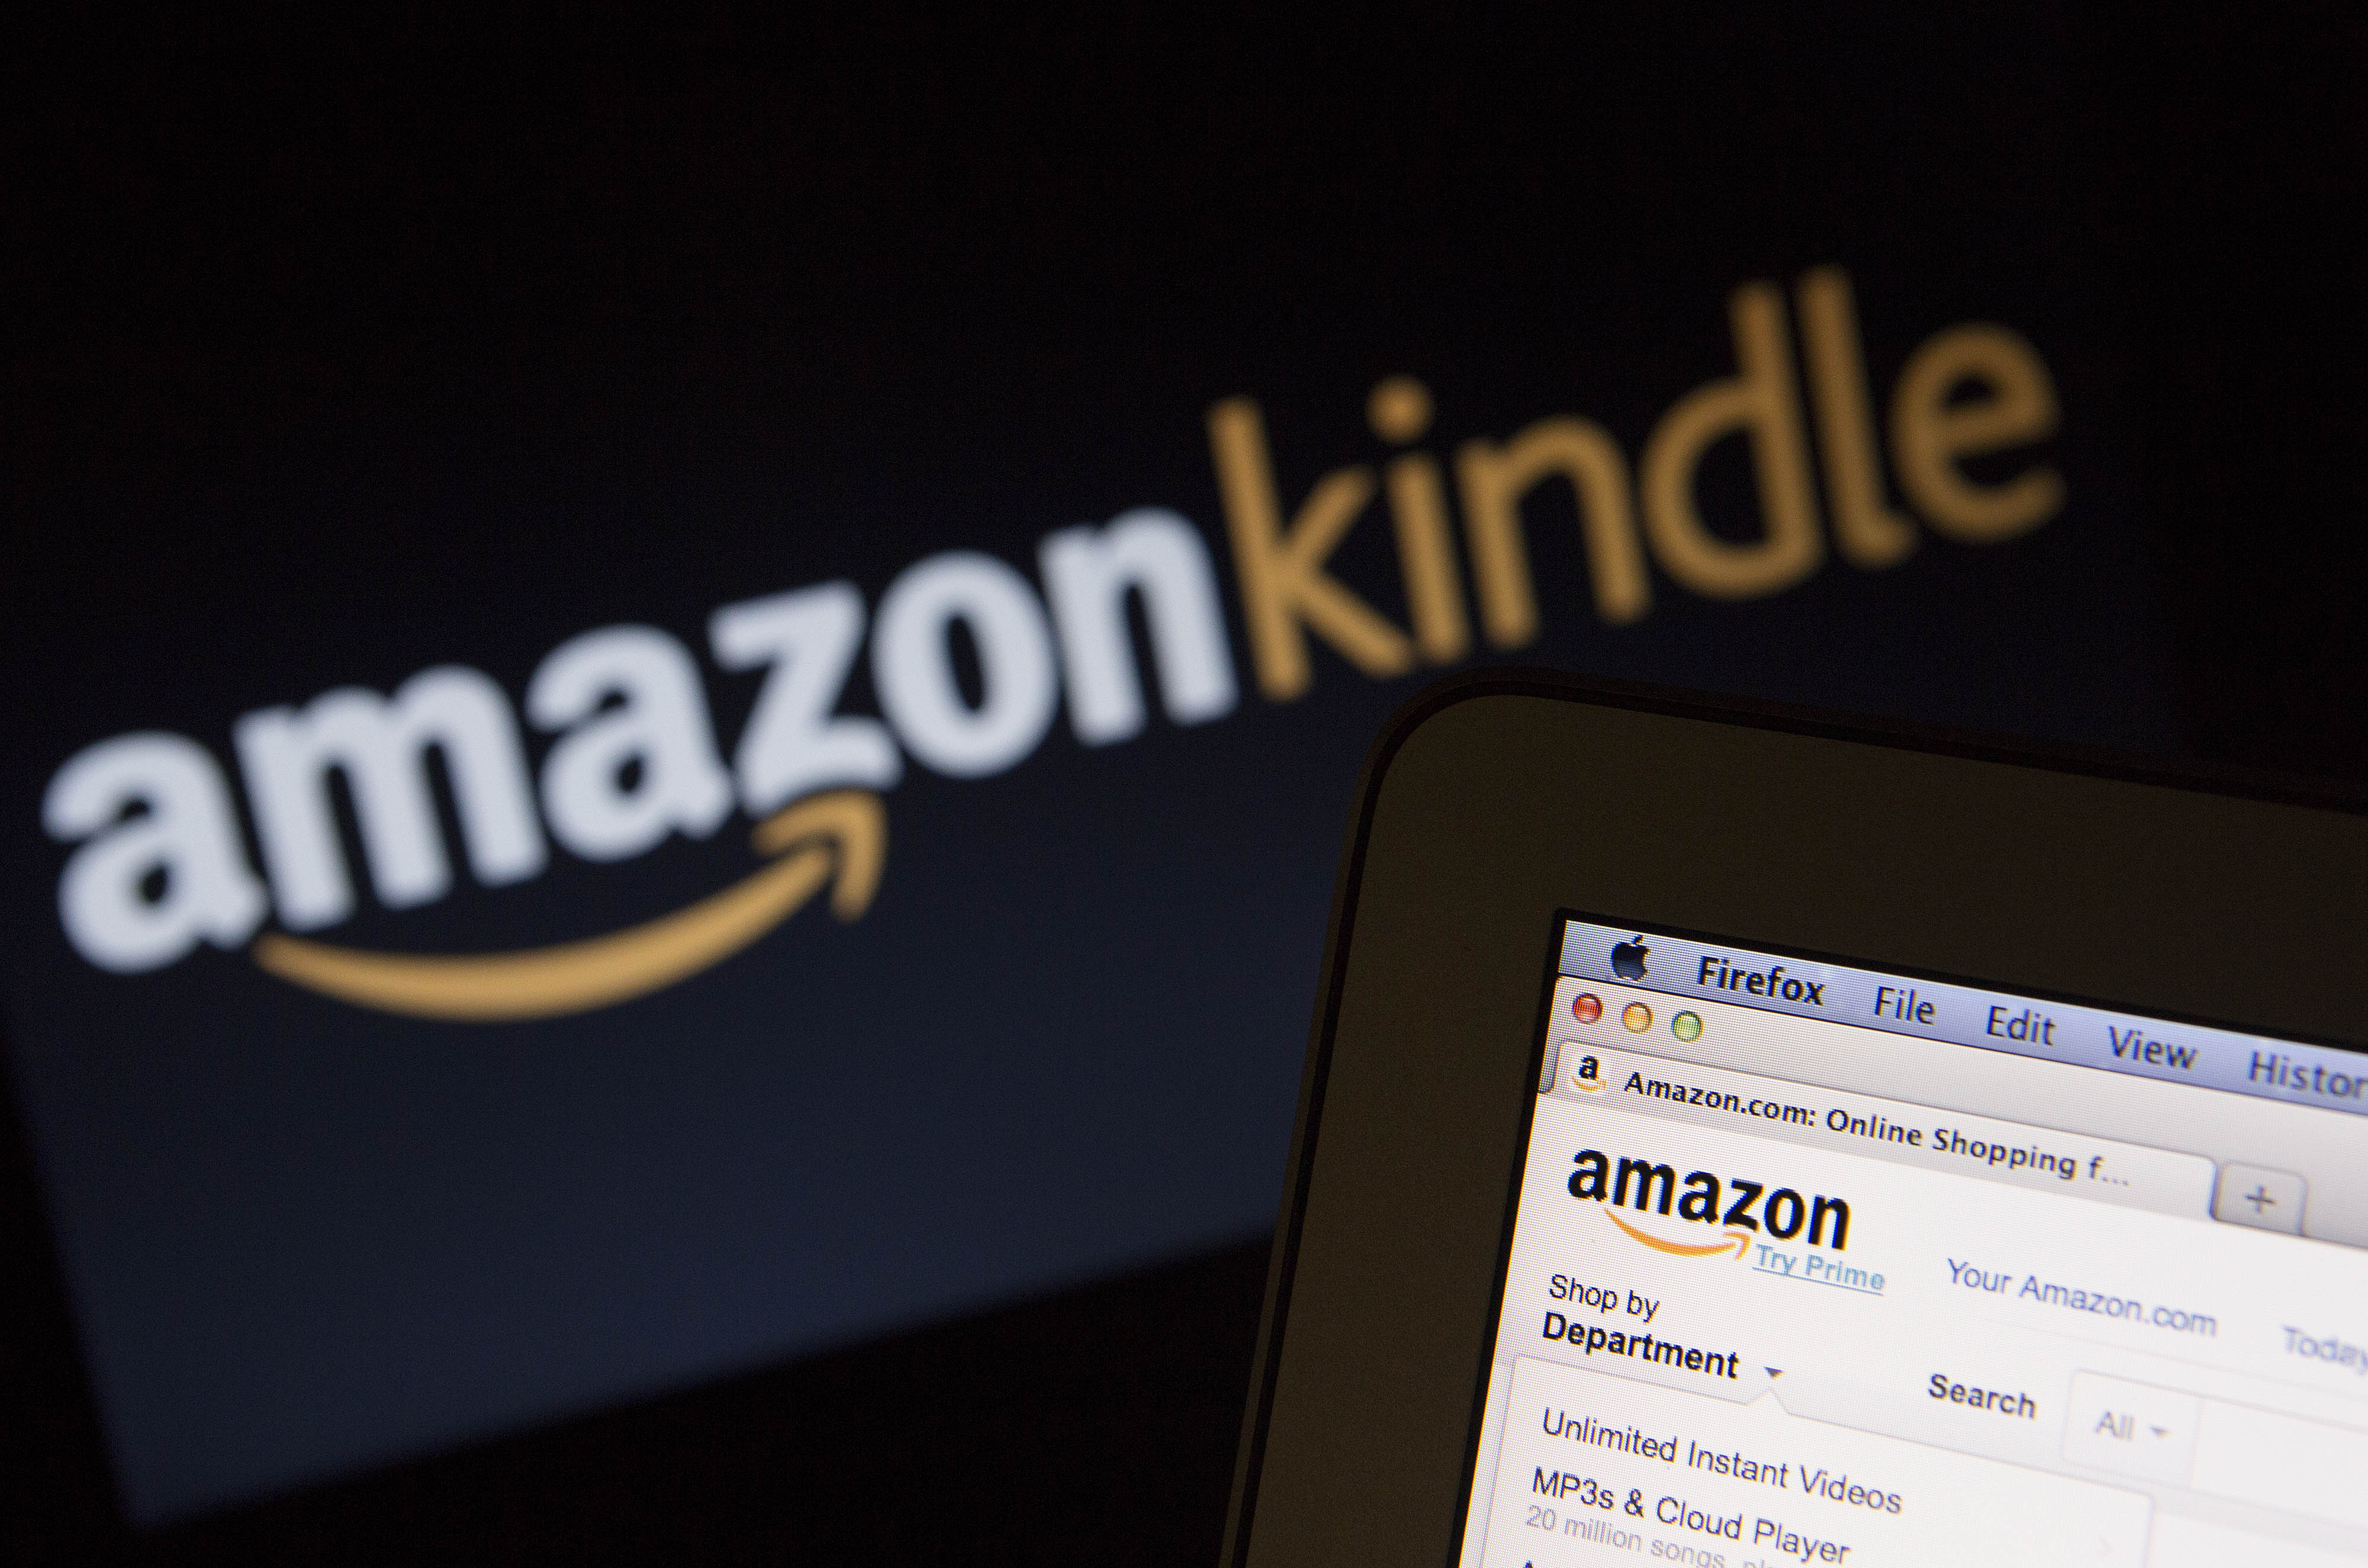 Amazon Kindle Logo - Amazon Is Making It Easier to Publish Your Own Kindle Textbooks | Time